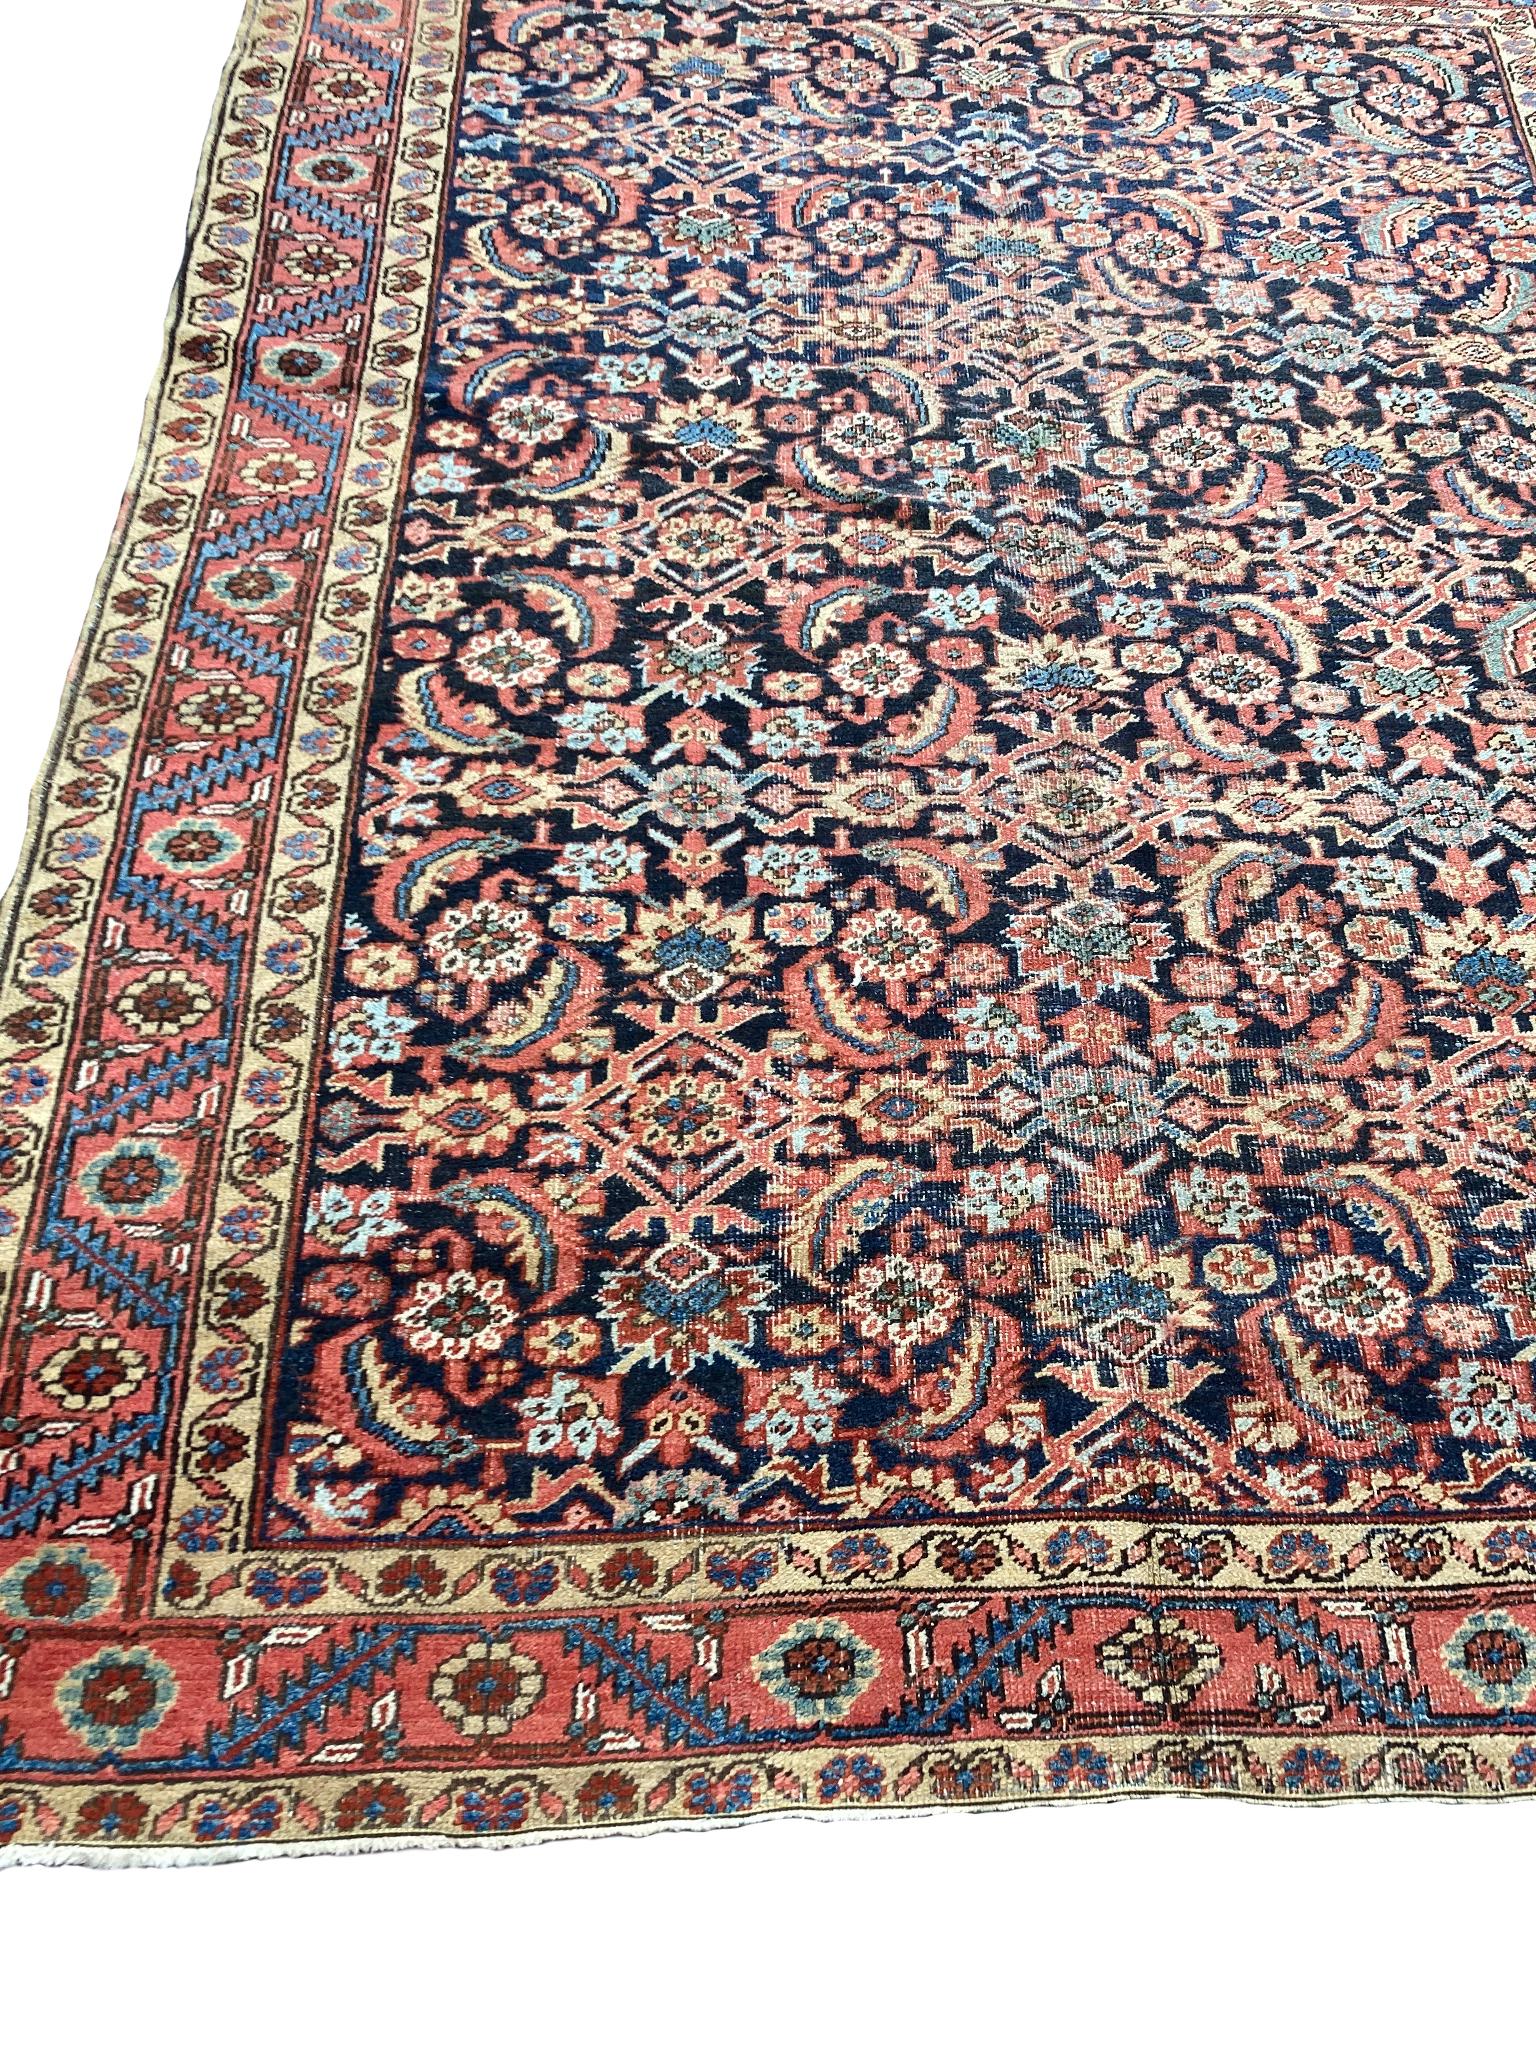 Hand-Knotted 1930s Heriz Rug